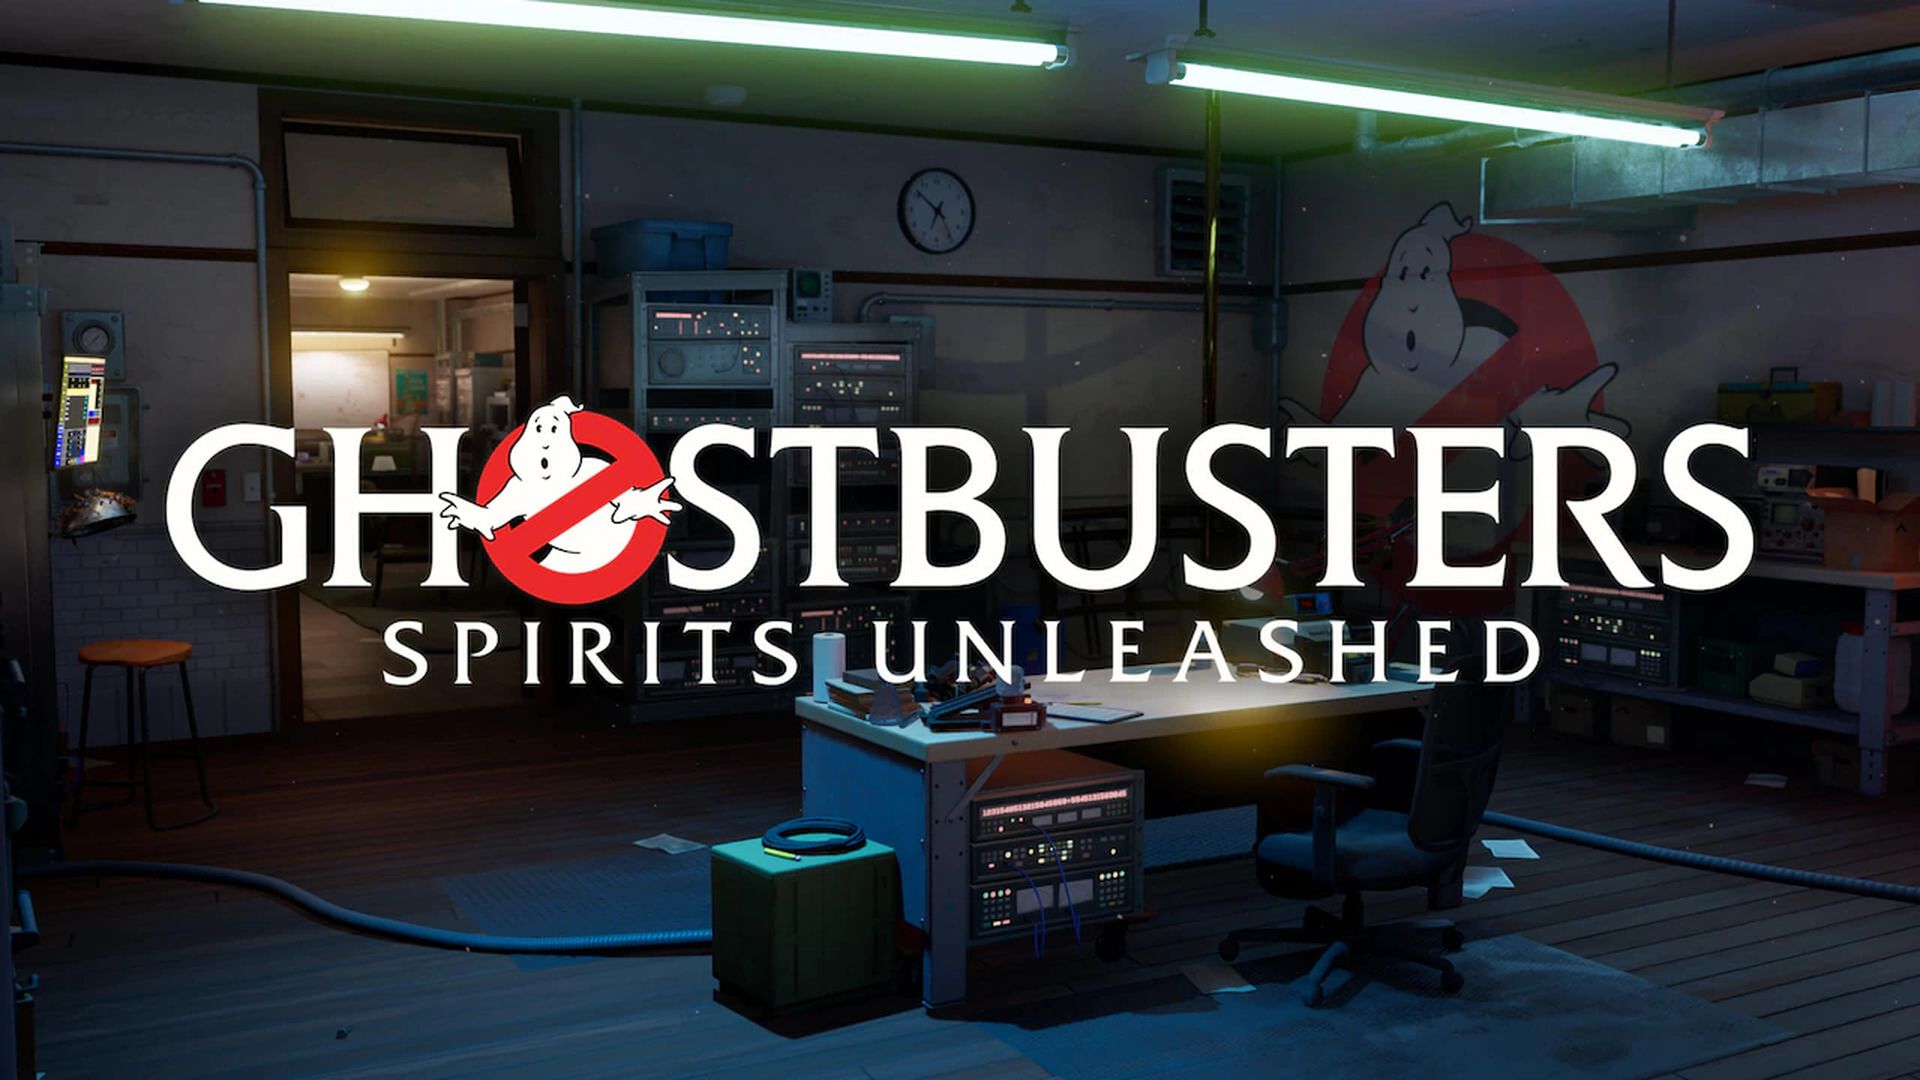 In this article, we are going to be covering Ghostbusters Spirits Unleashed single player, going over the AI of the game, and our general thoughts on the game itself as a whole.